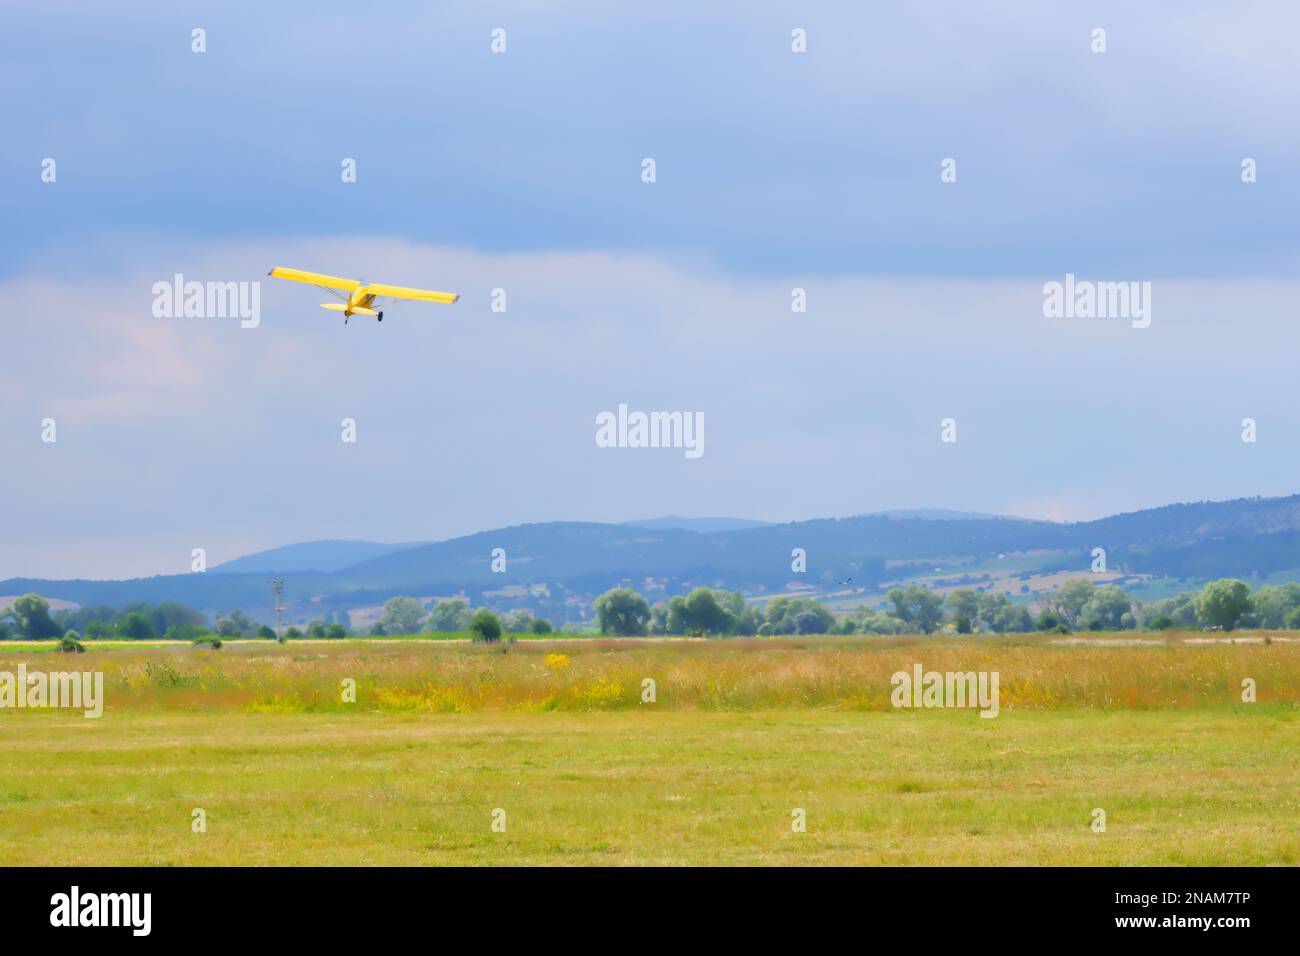 Yellow single engine airplane taking off from the field Stock Photo